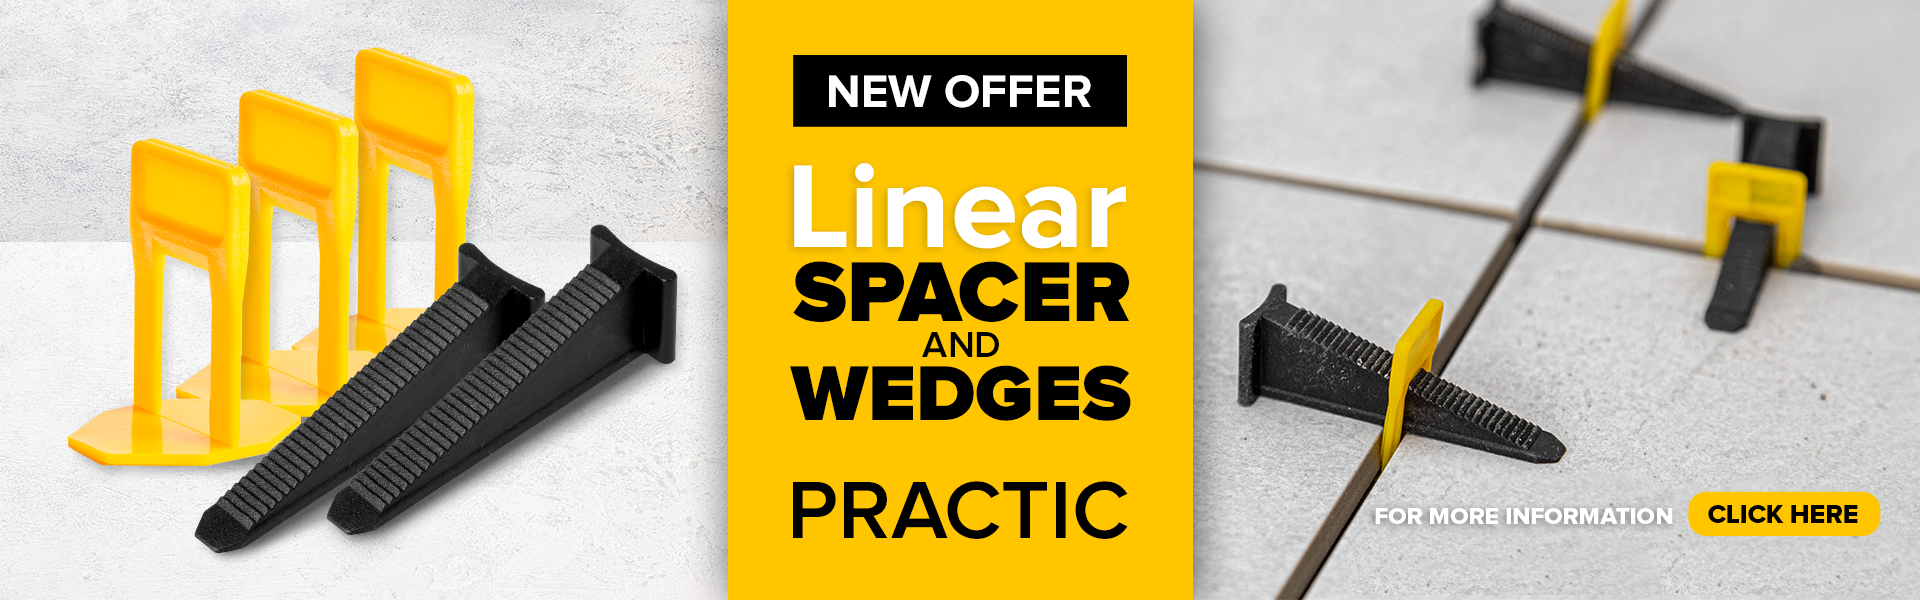 Linear spacer and wedges Practic